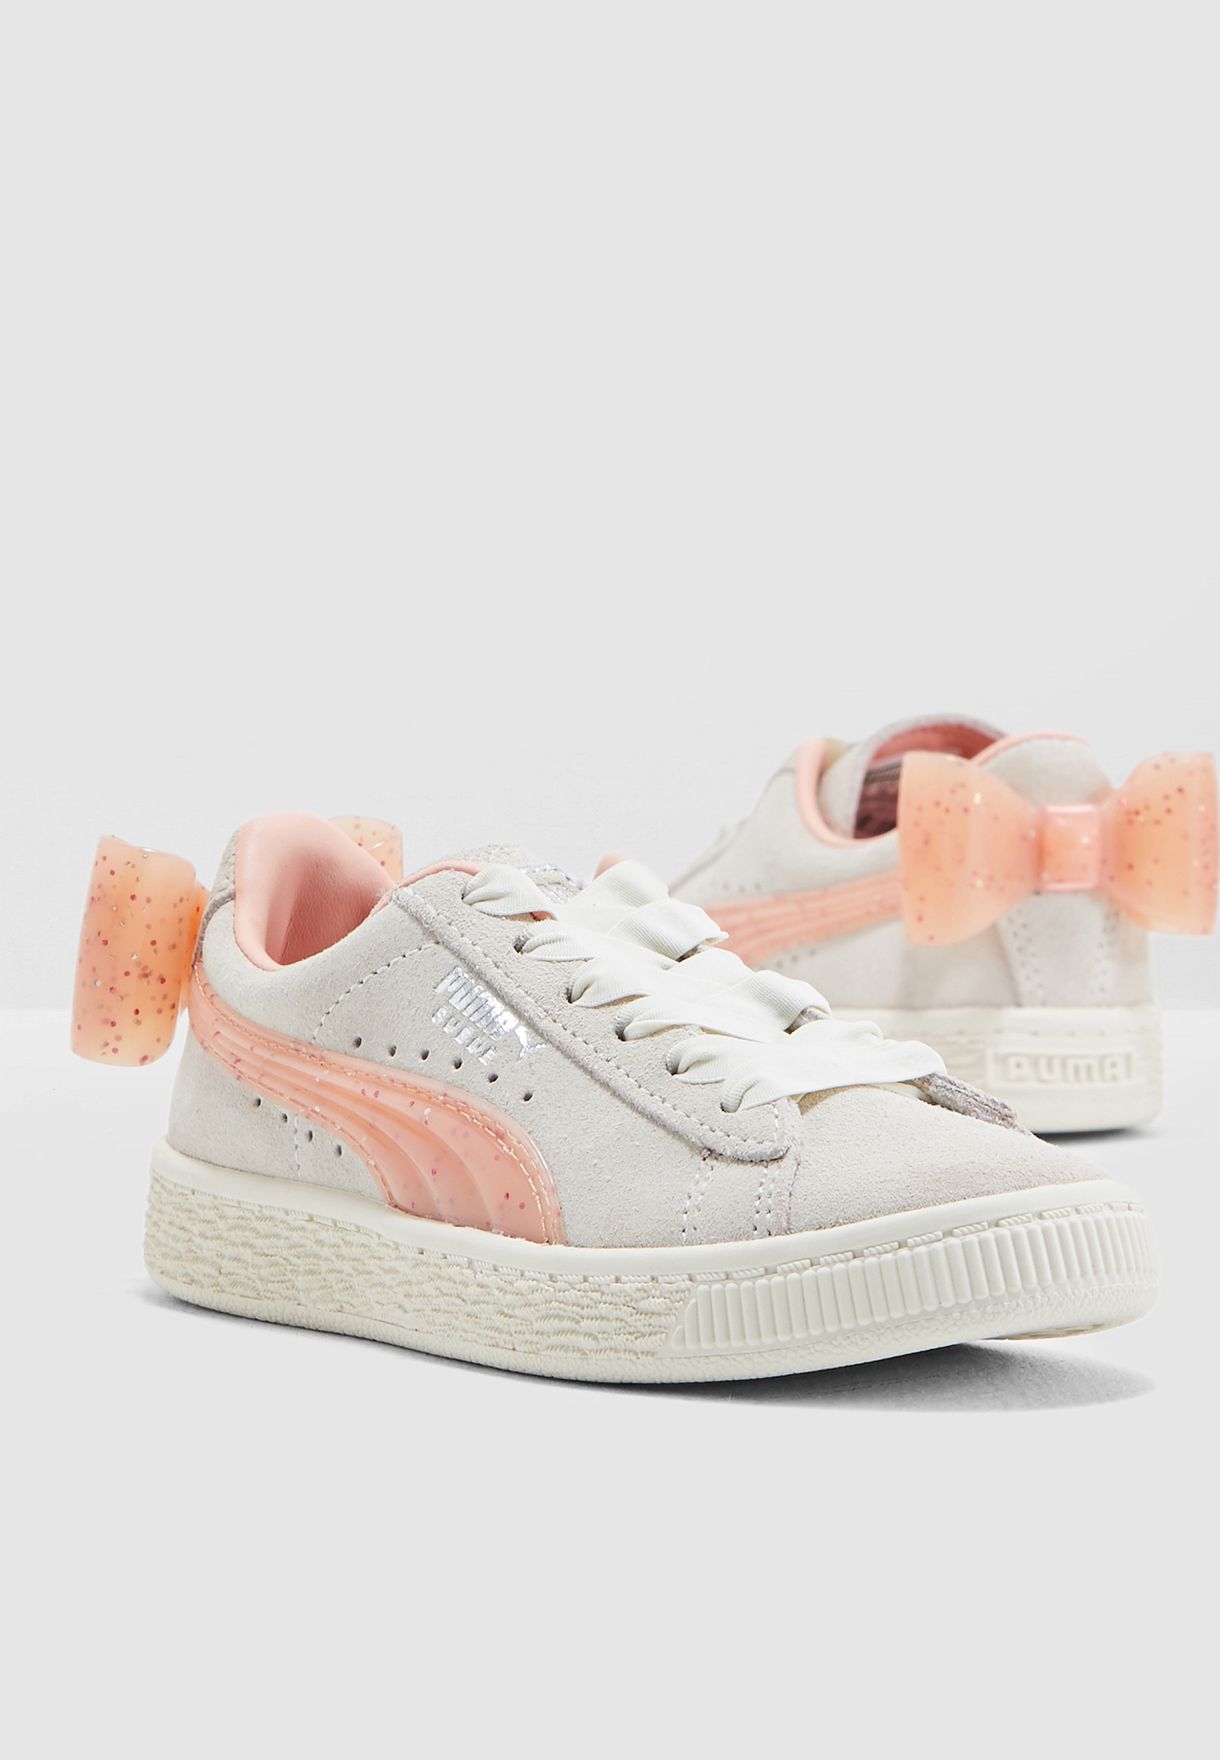 PUMA beige Infant Suede Bow Jelly AC 